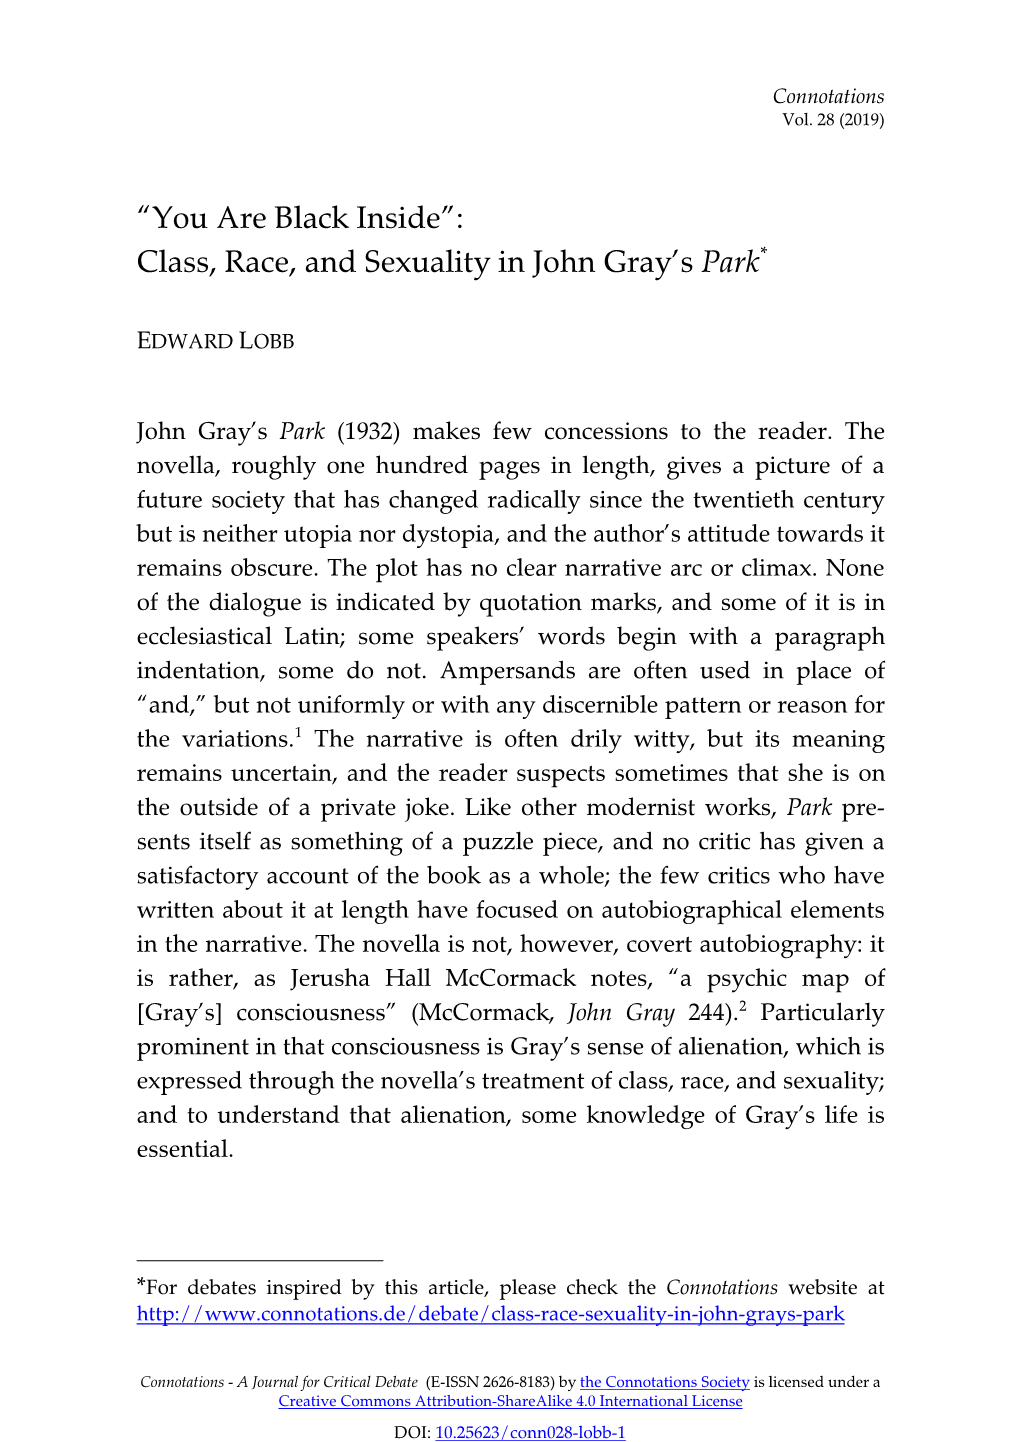 Class, Race, and Sexuality in John Gray's Park